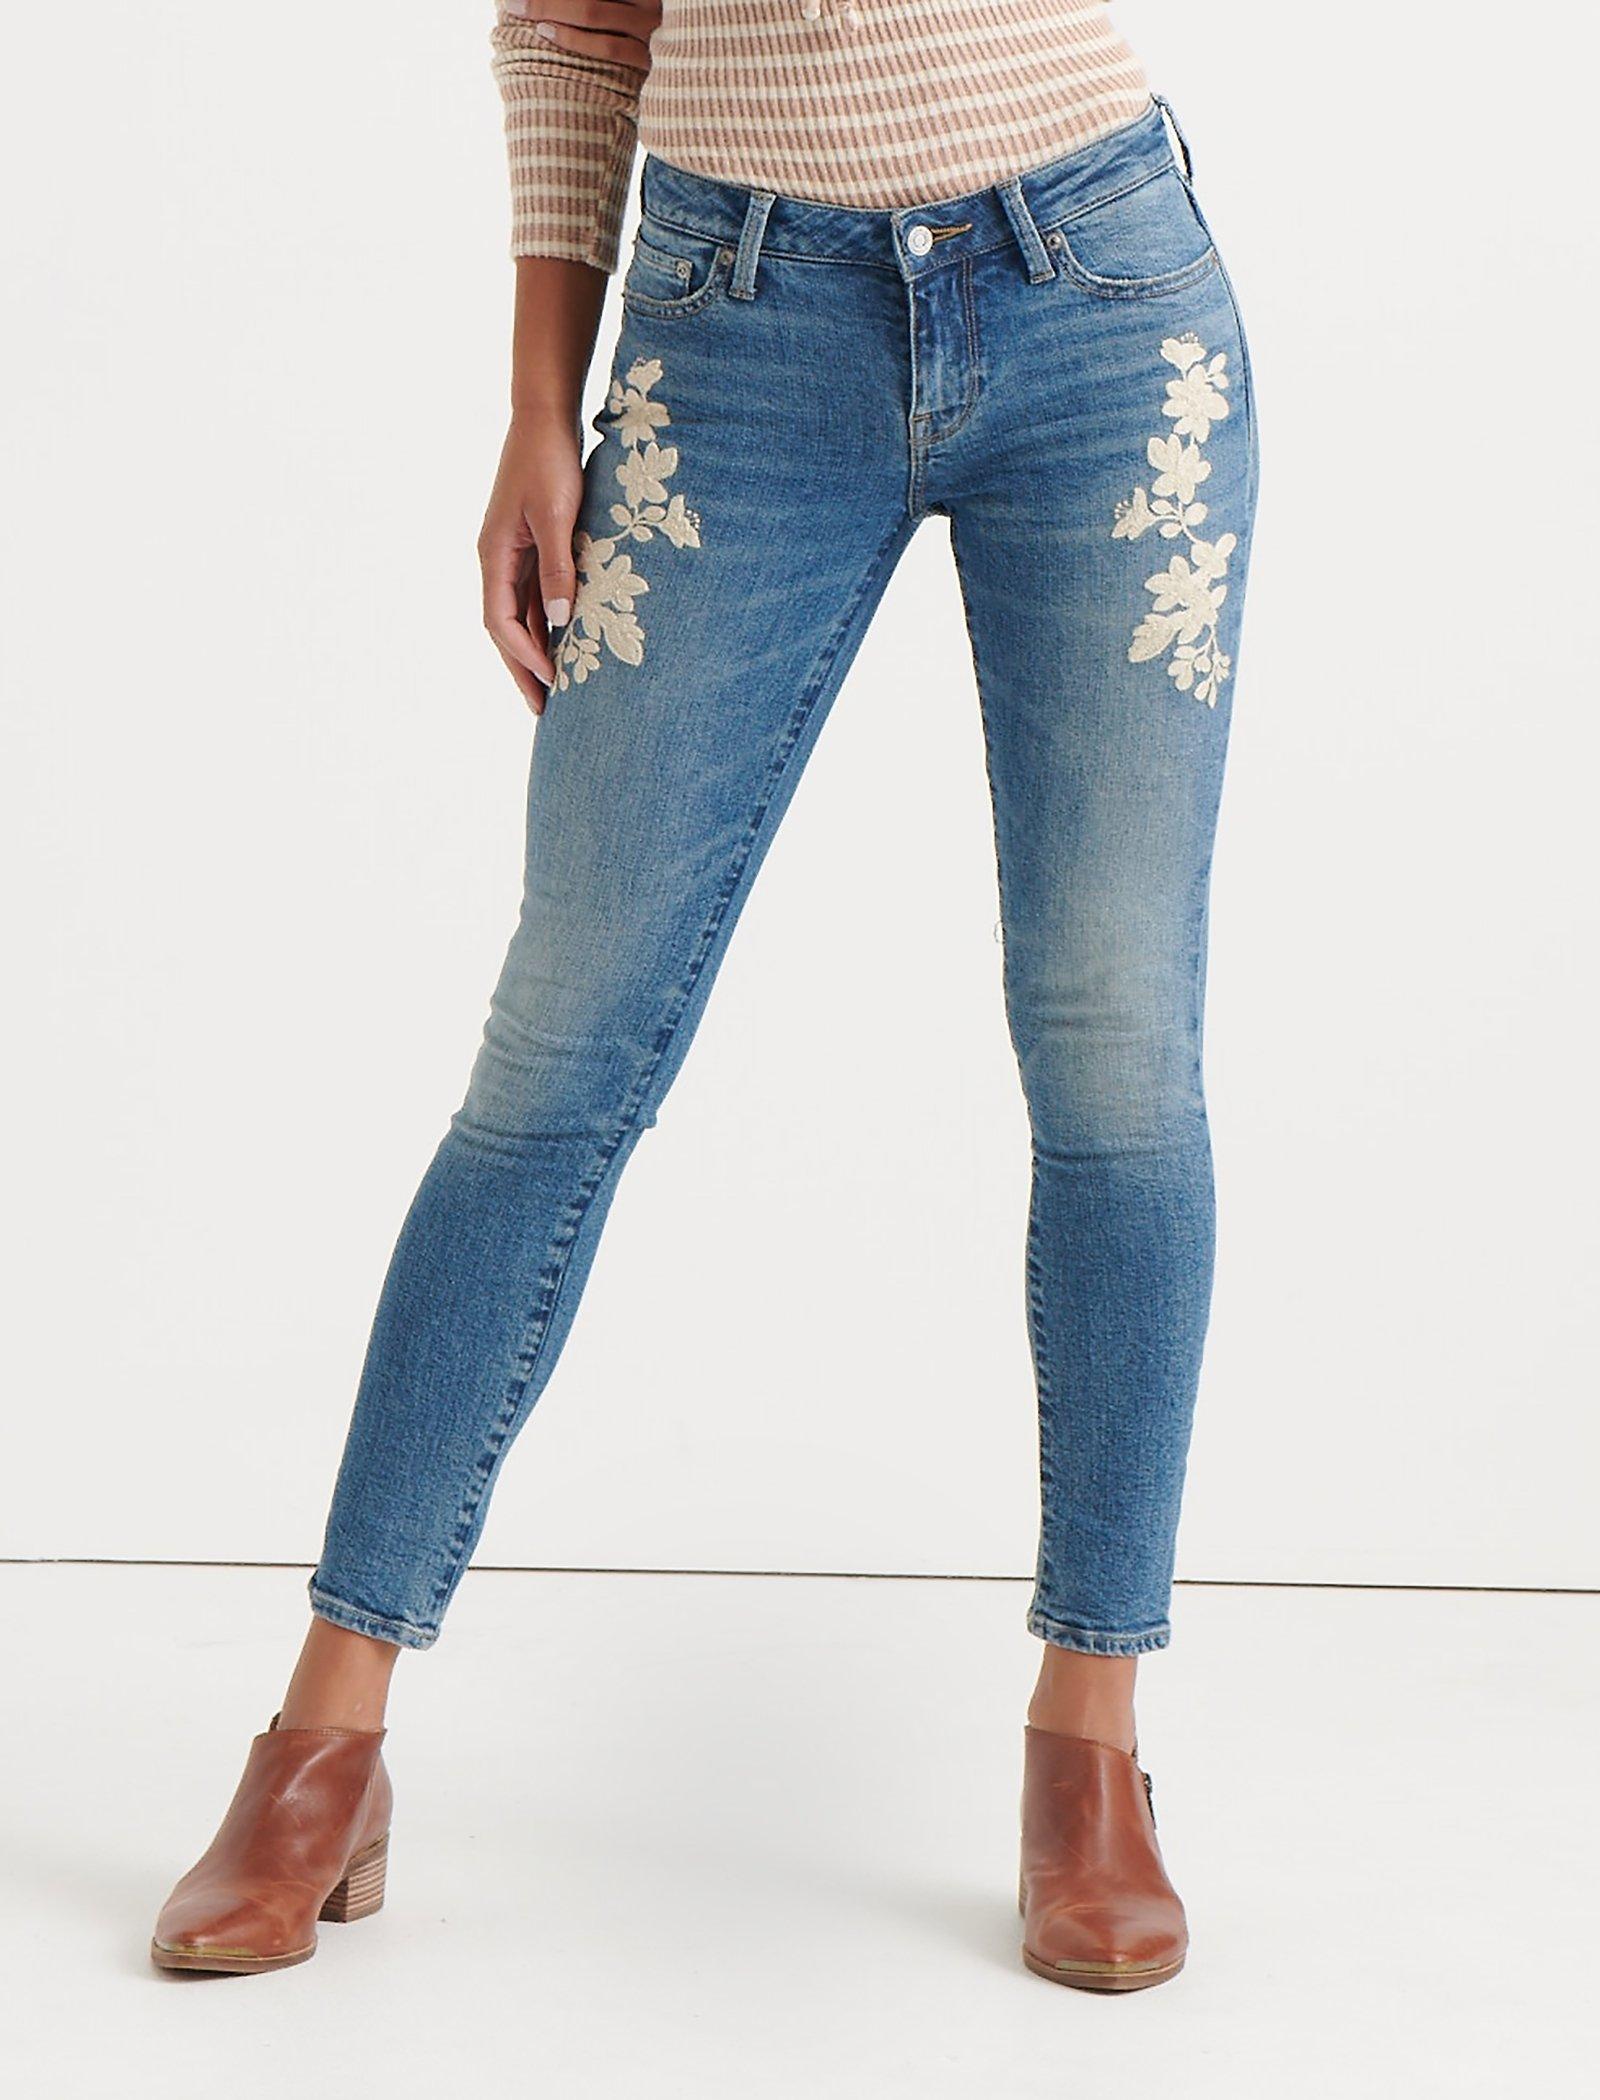 lucky embroidered jeans